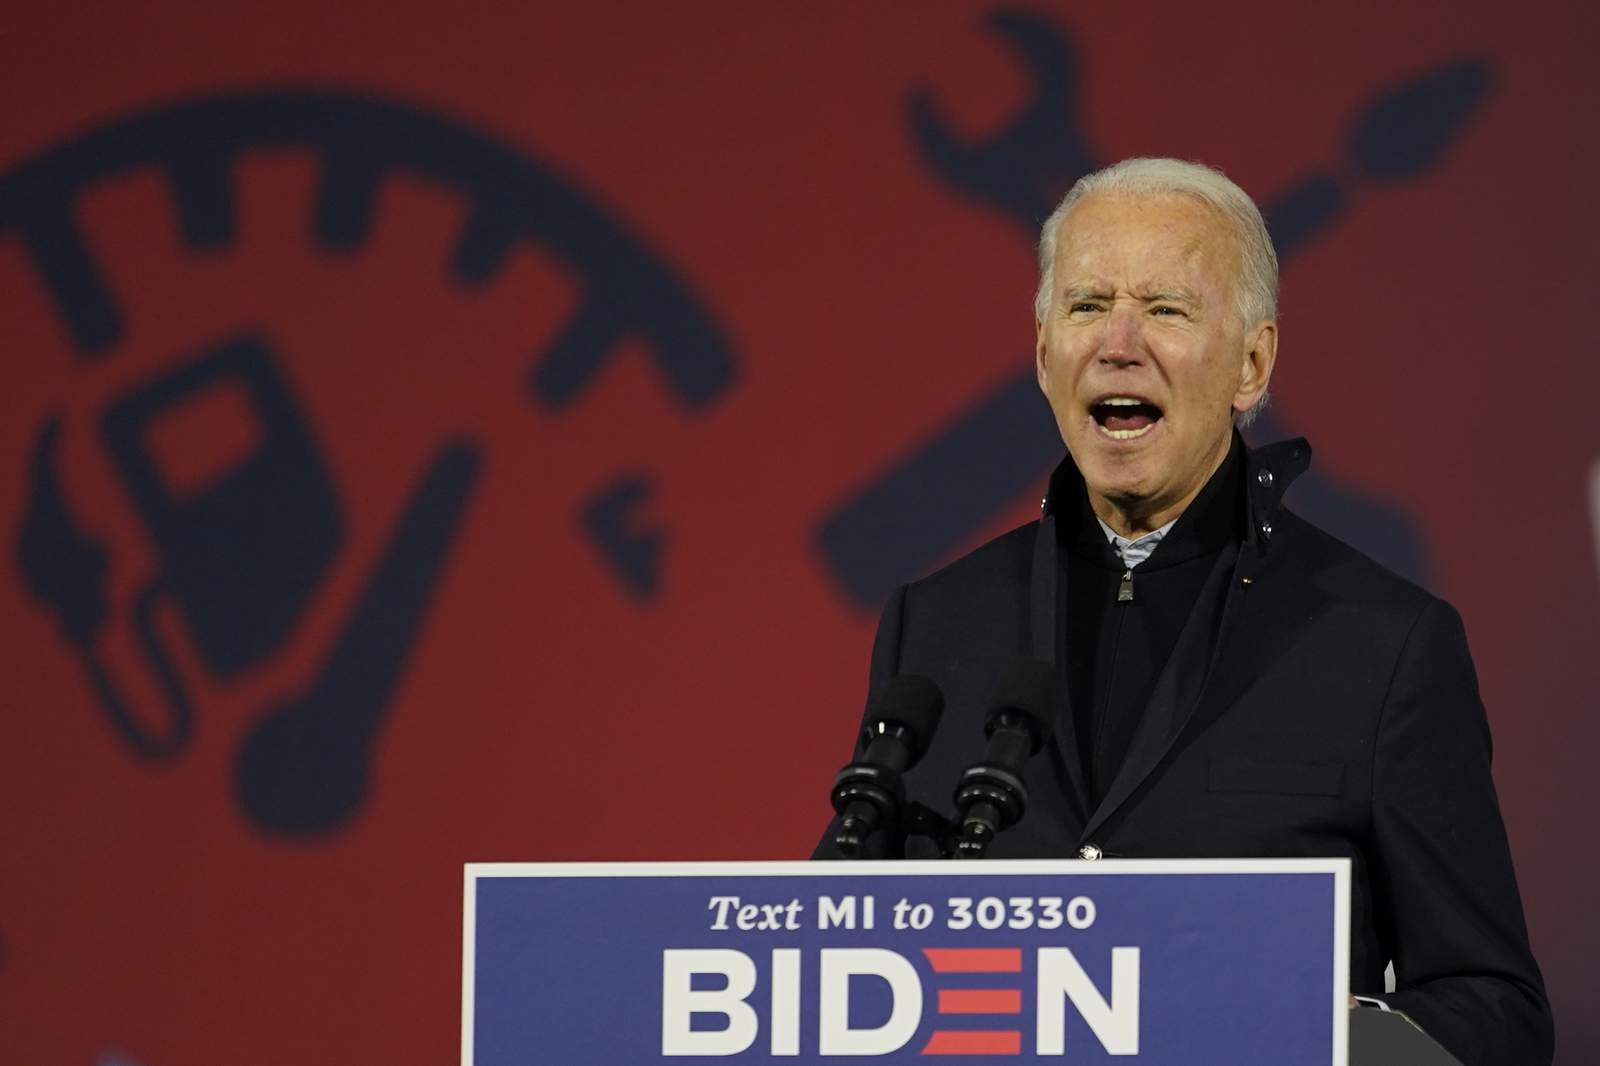 Biden's lessons learned: spending time, money in Midwest